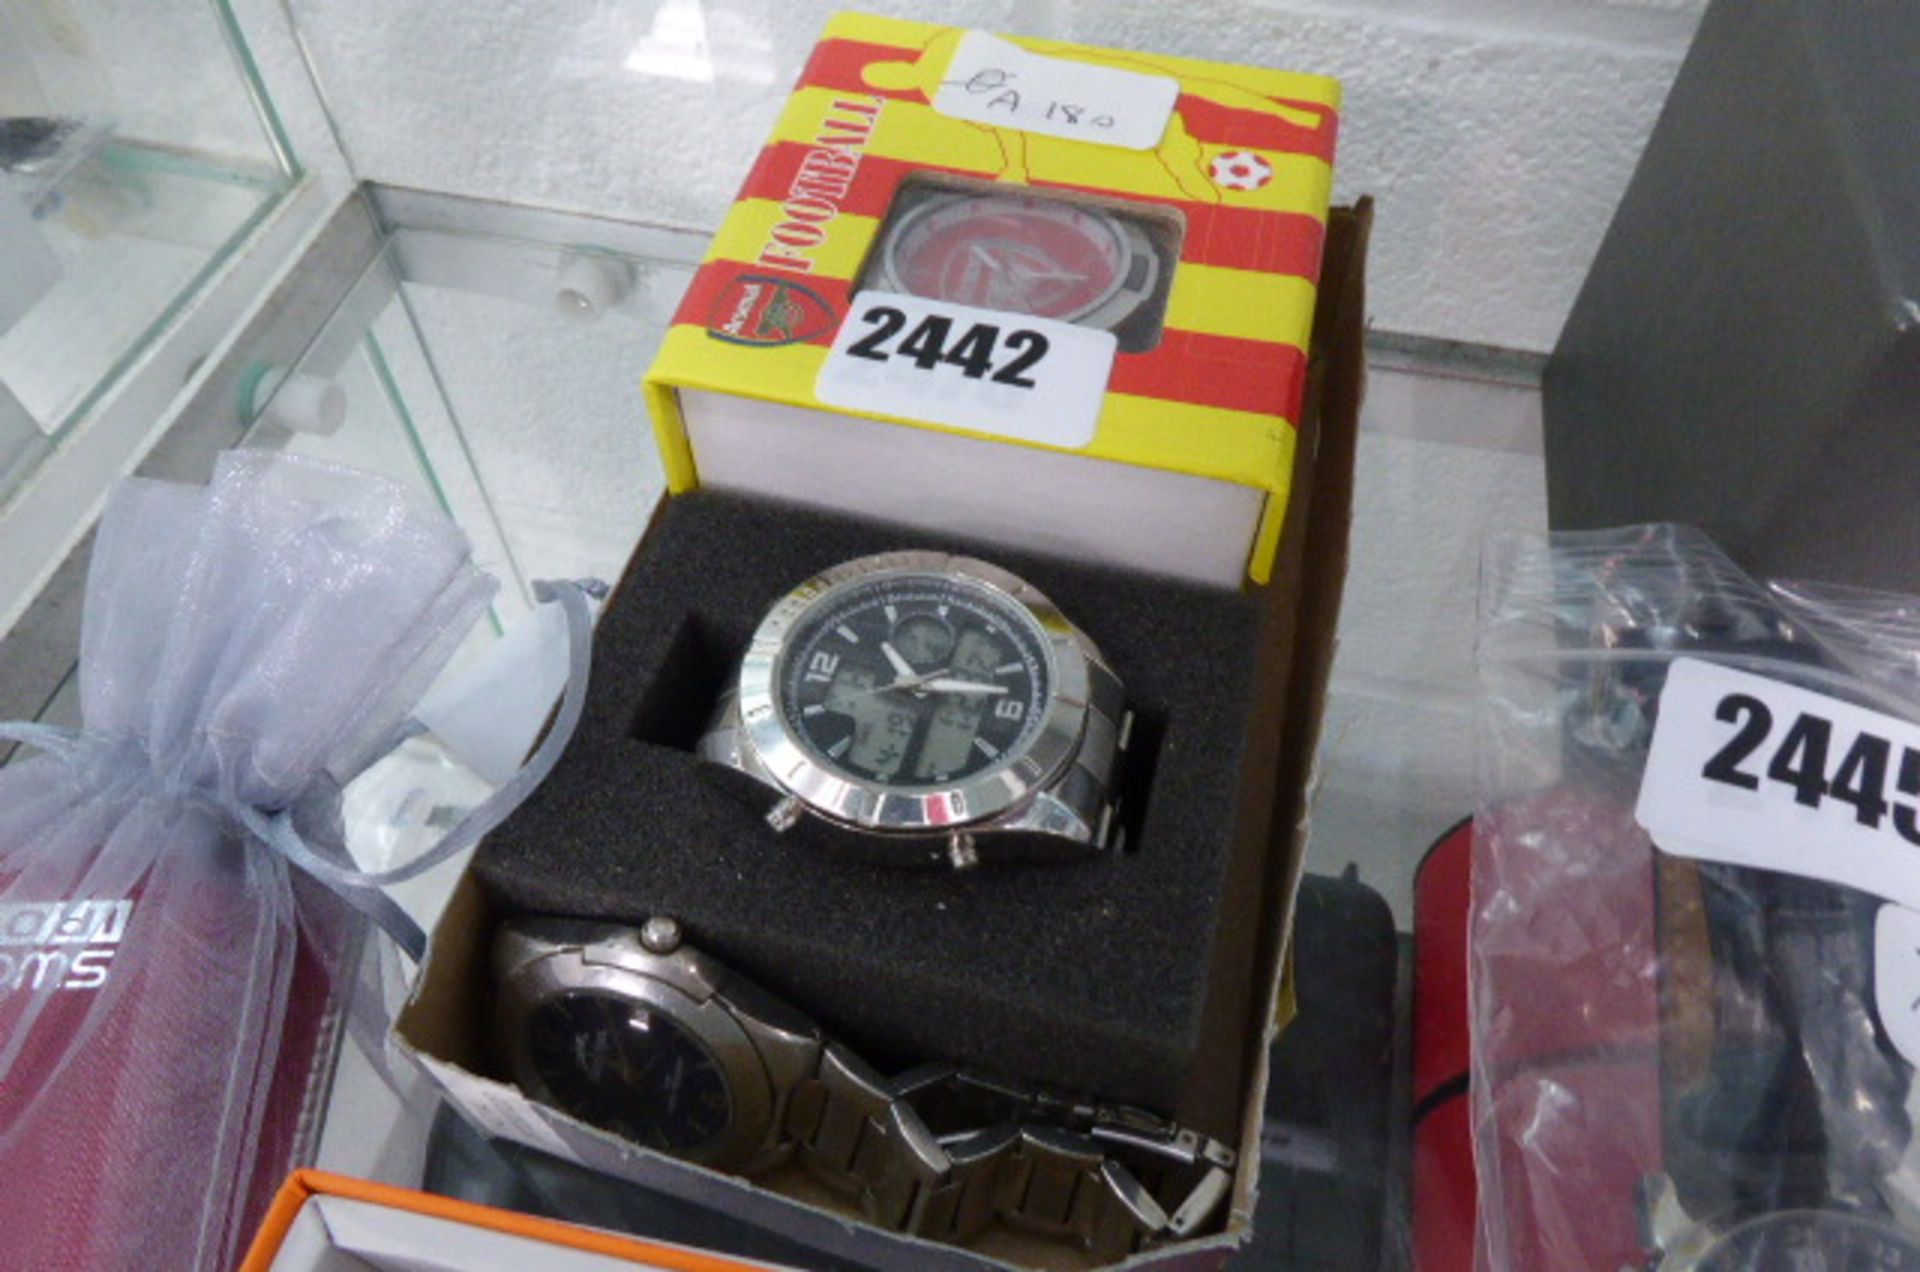 2476 Selection of 3 gents stainless steel wrist watches some in boxes